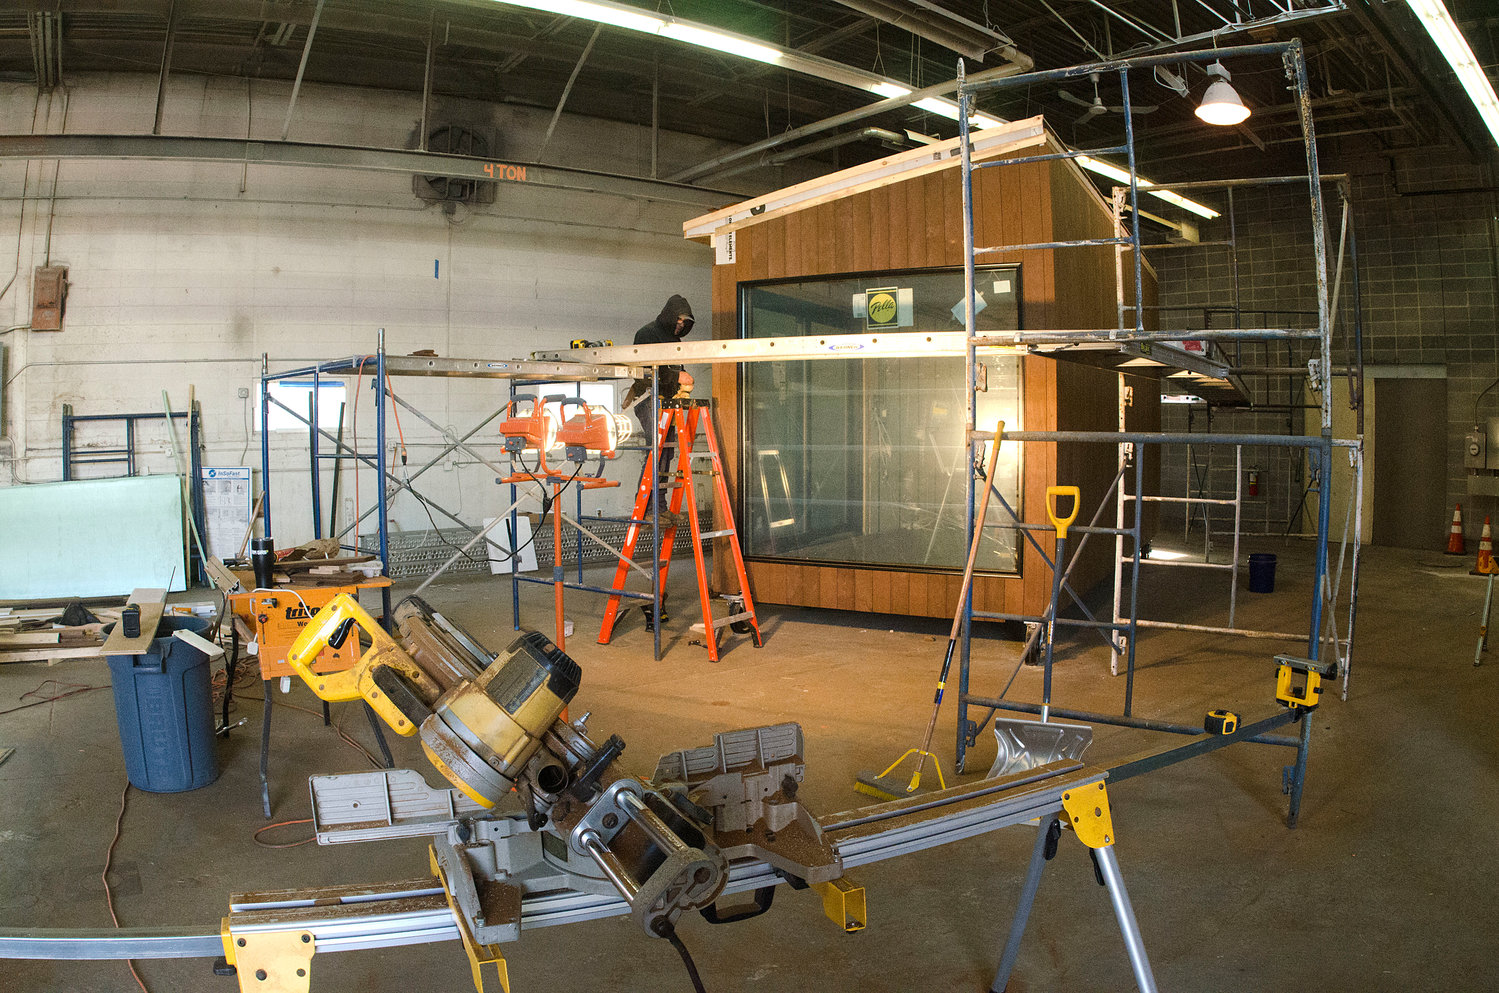 Work is underway on one of the ADDASPACE living/working units inside the company's Bristol facility.